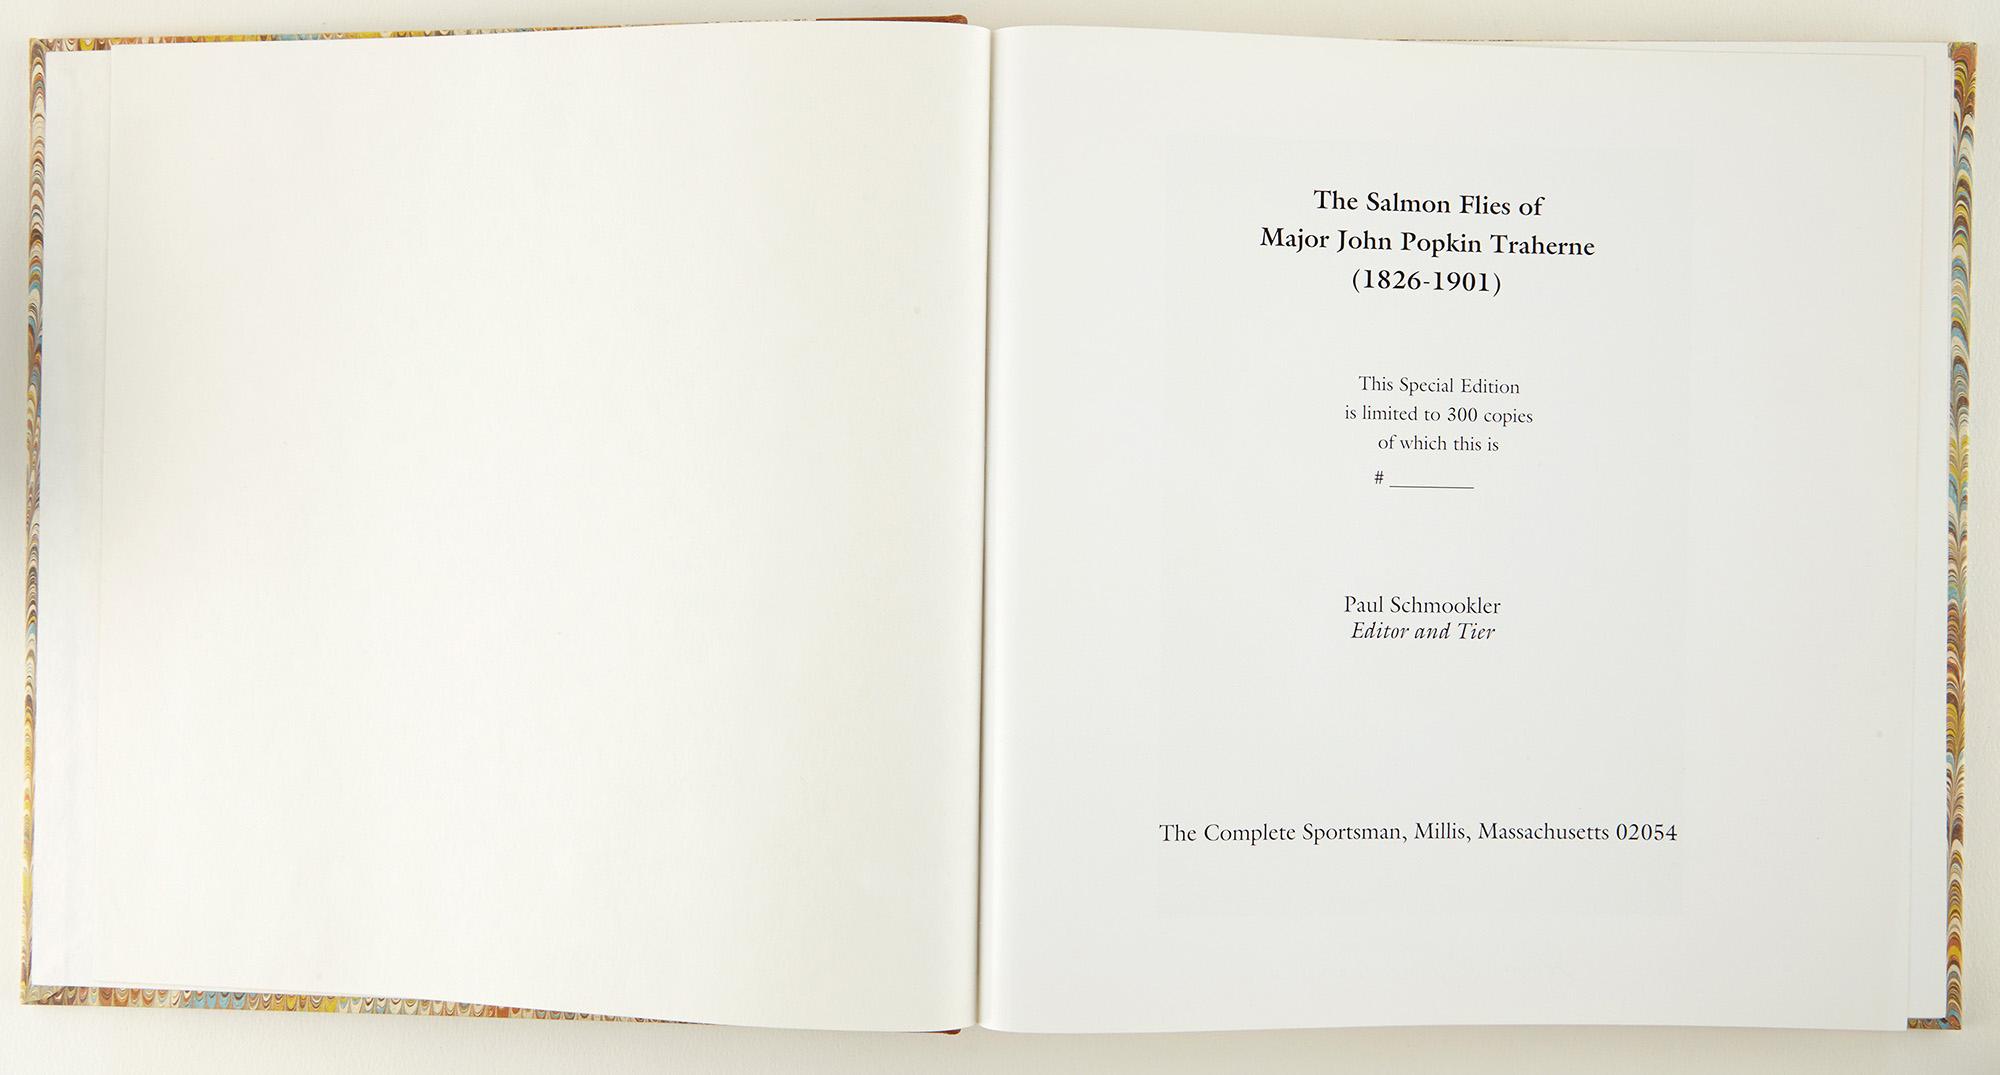 Sold at Auction: Pair of books incl. “Salmon Flies” by Poul